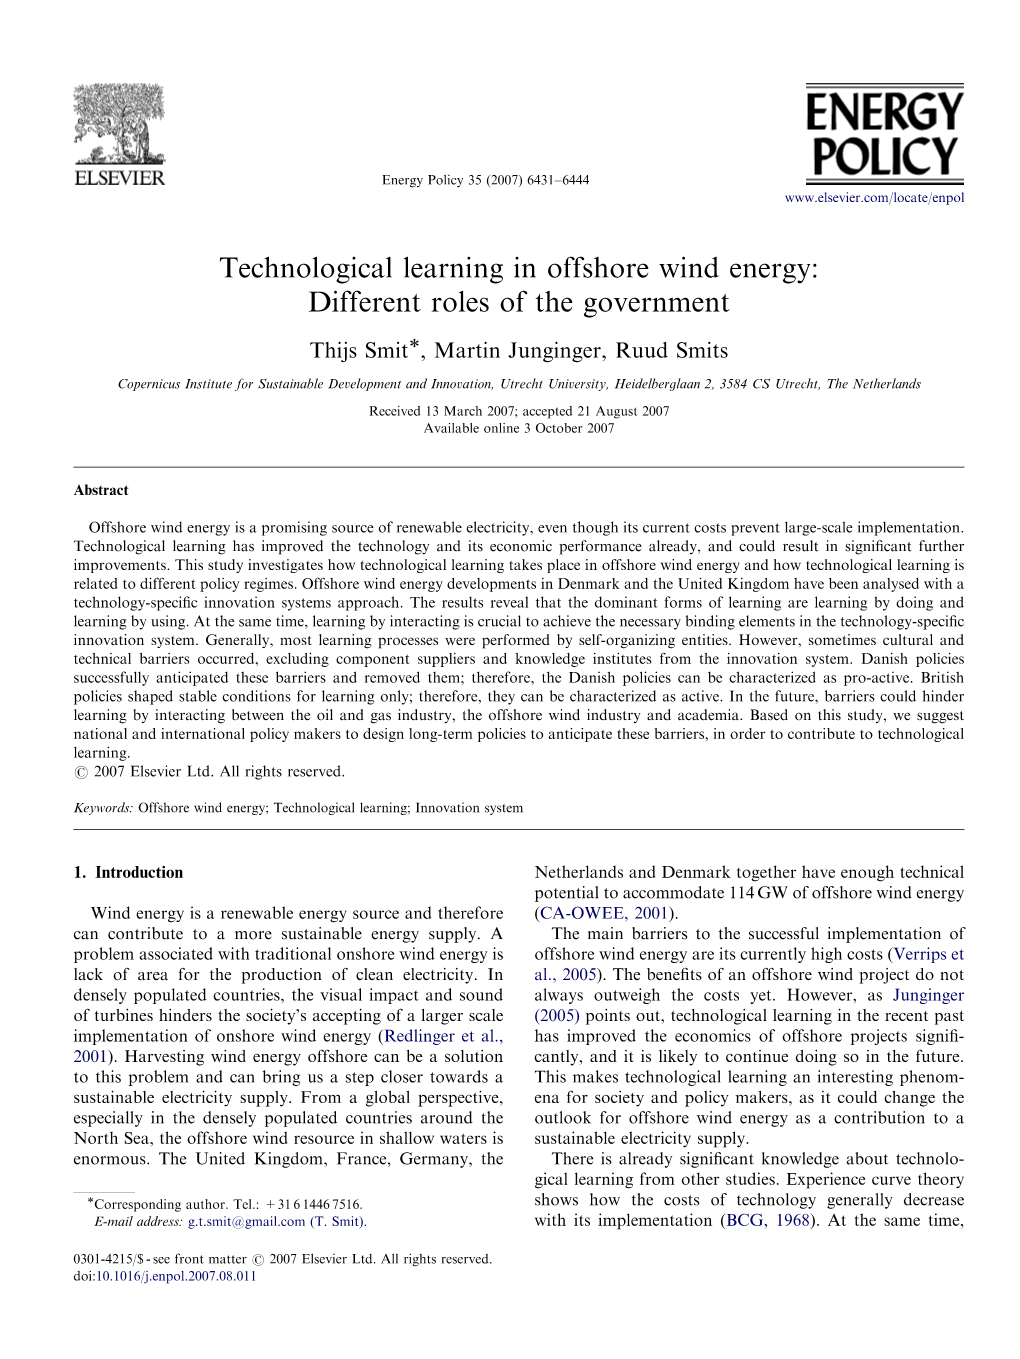 Technological Learning in Offshore Wind Energy: Different Roles of the Government